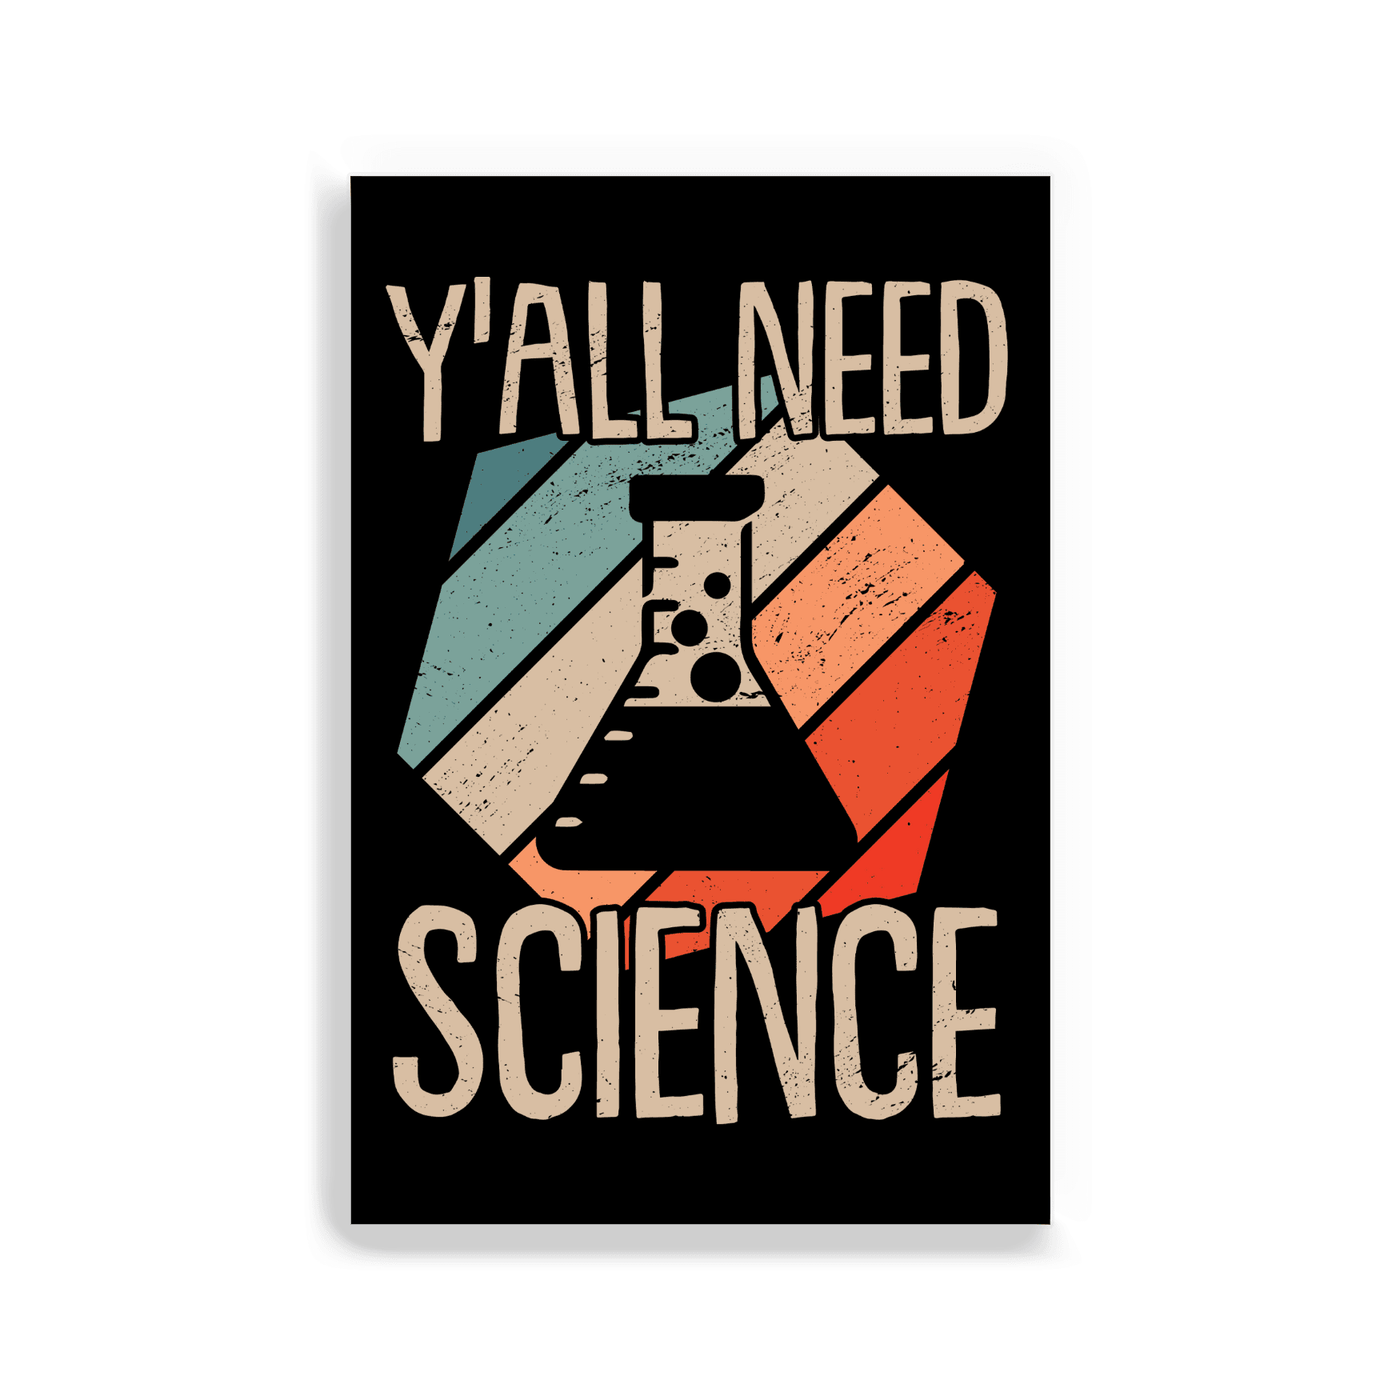 2x3 colorful magnet with image of a flask and text that says y'all need science